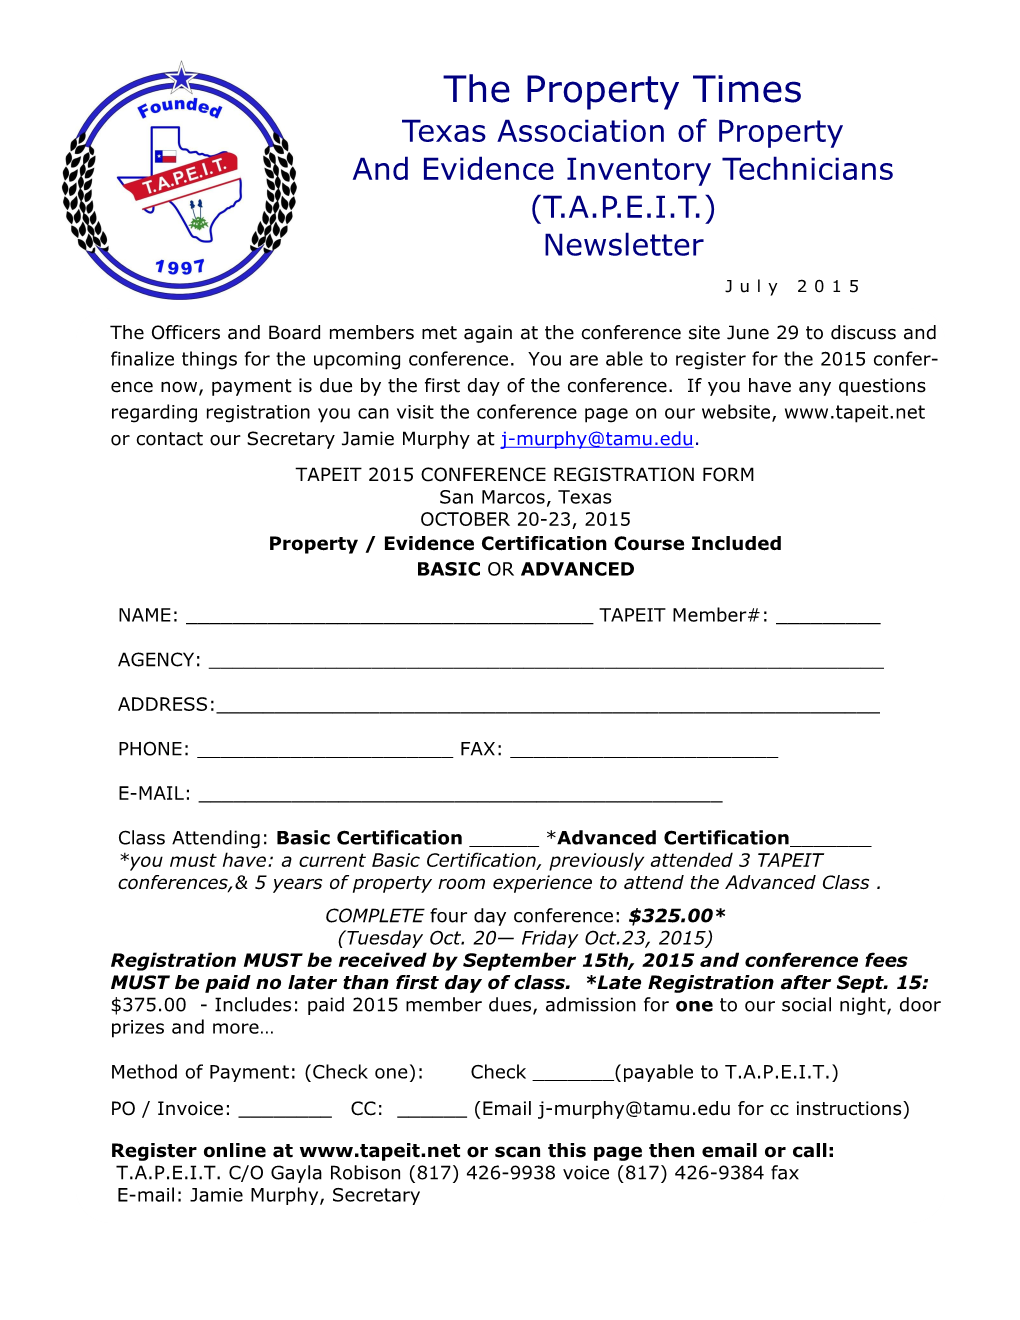 The Property Times Texas Association of Property and Evidence Inventory Technicians (T.A.P.E.I.T.) Newsletter